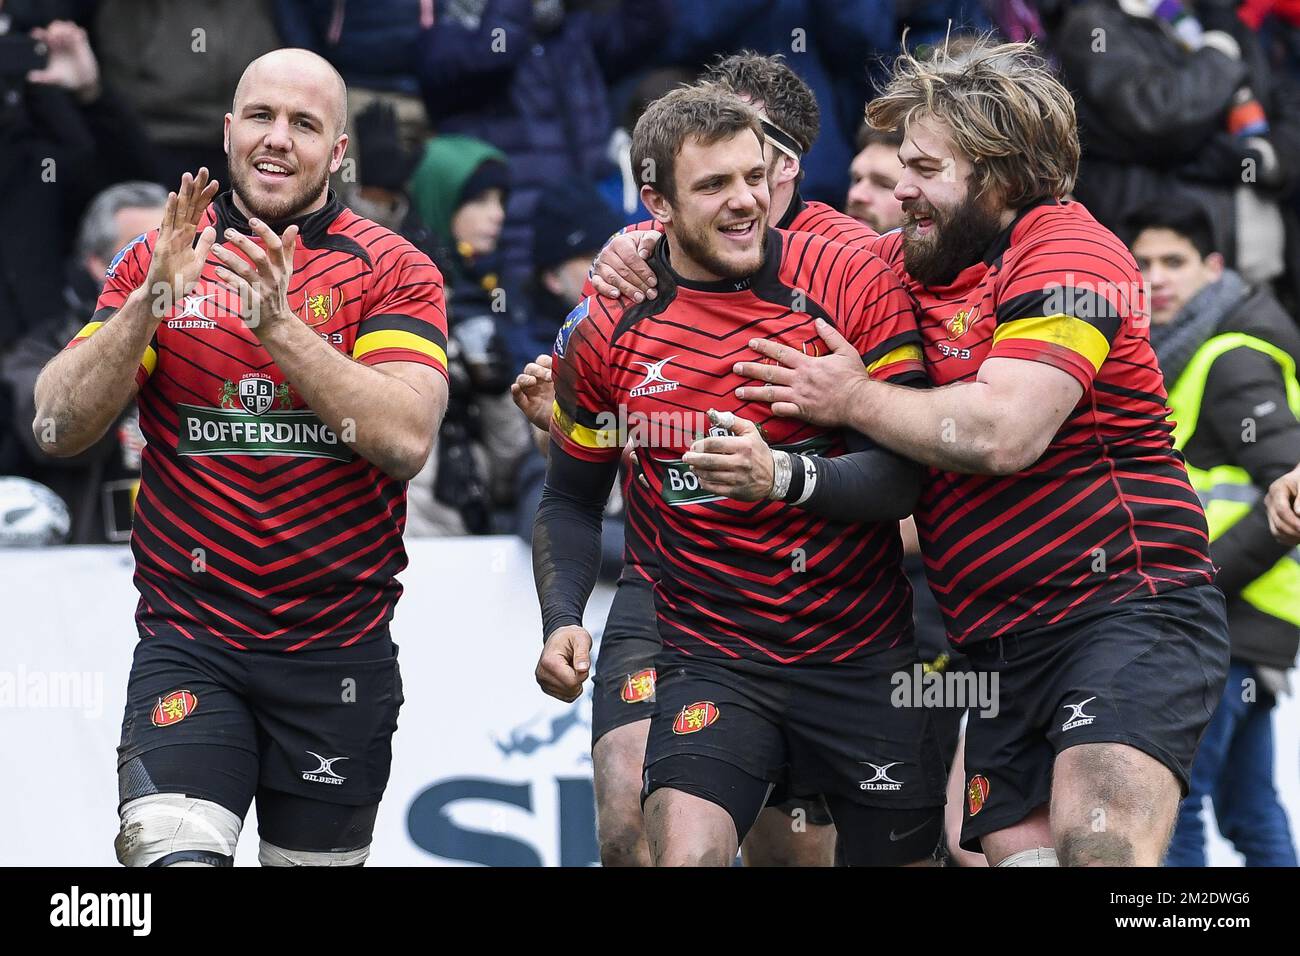 Belgian players celebrate after winning the game between the Black Devils, Belgian  national rugby team, and